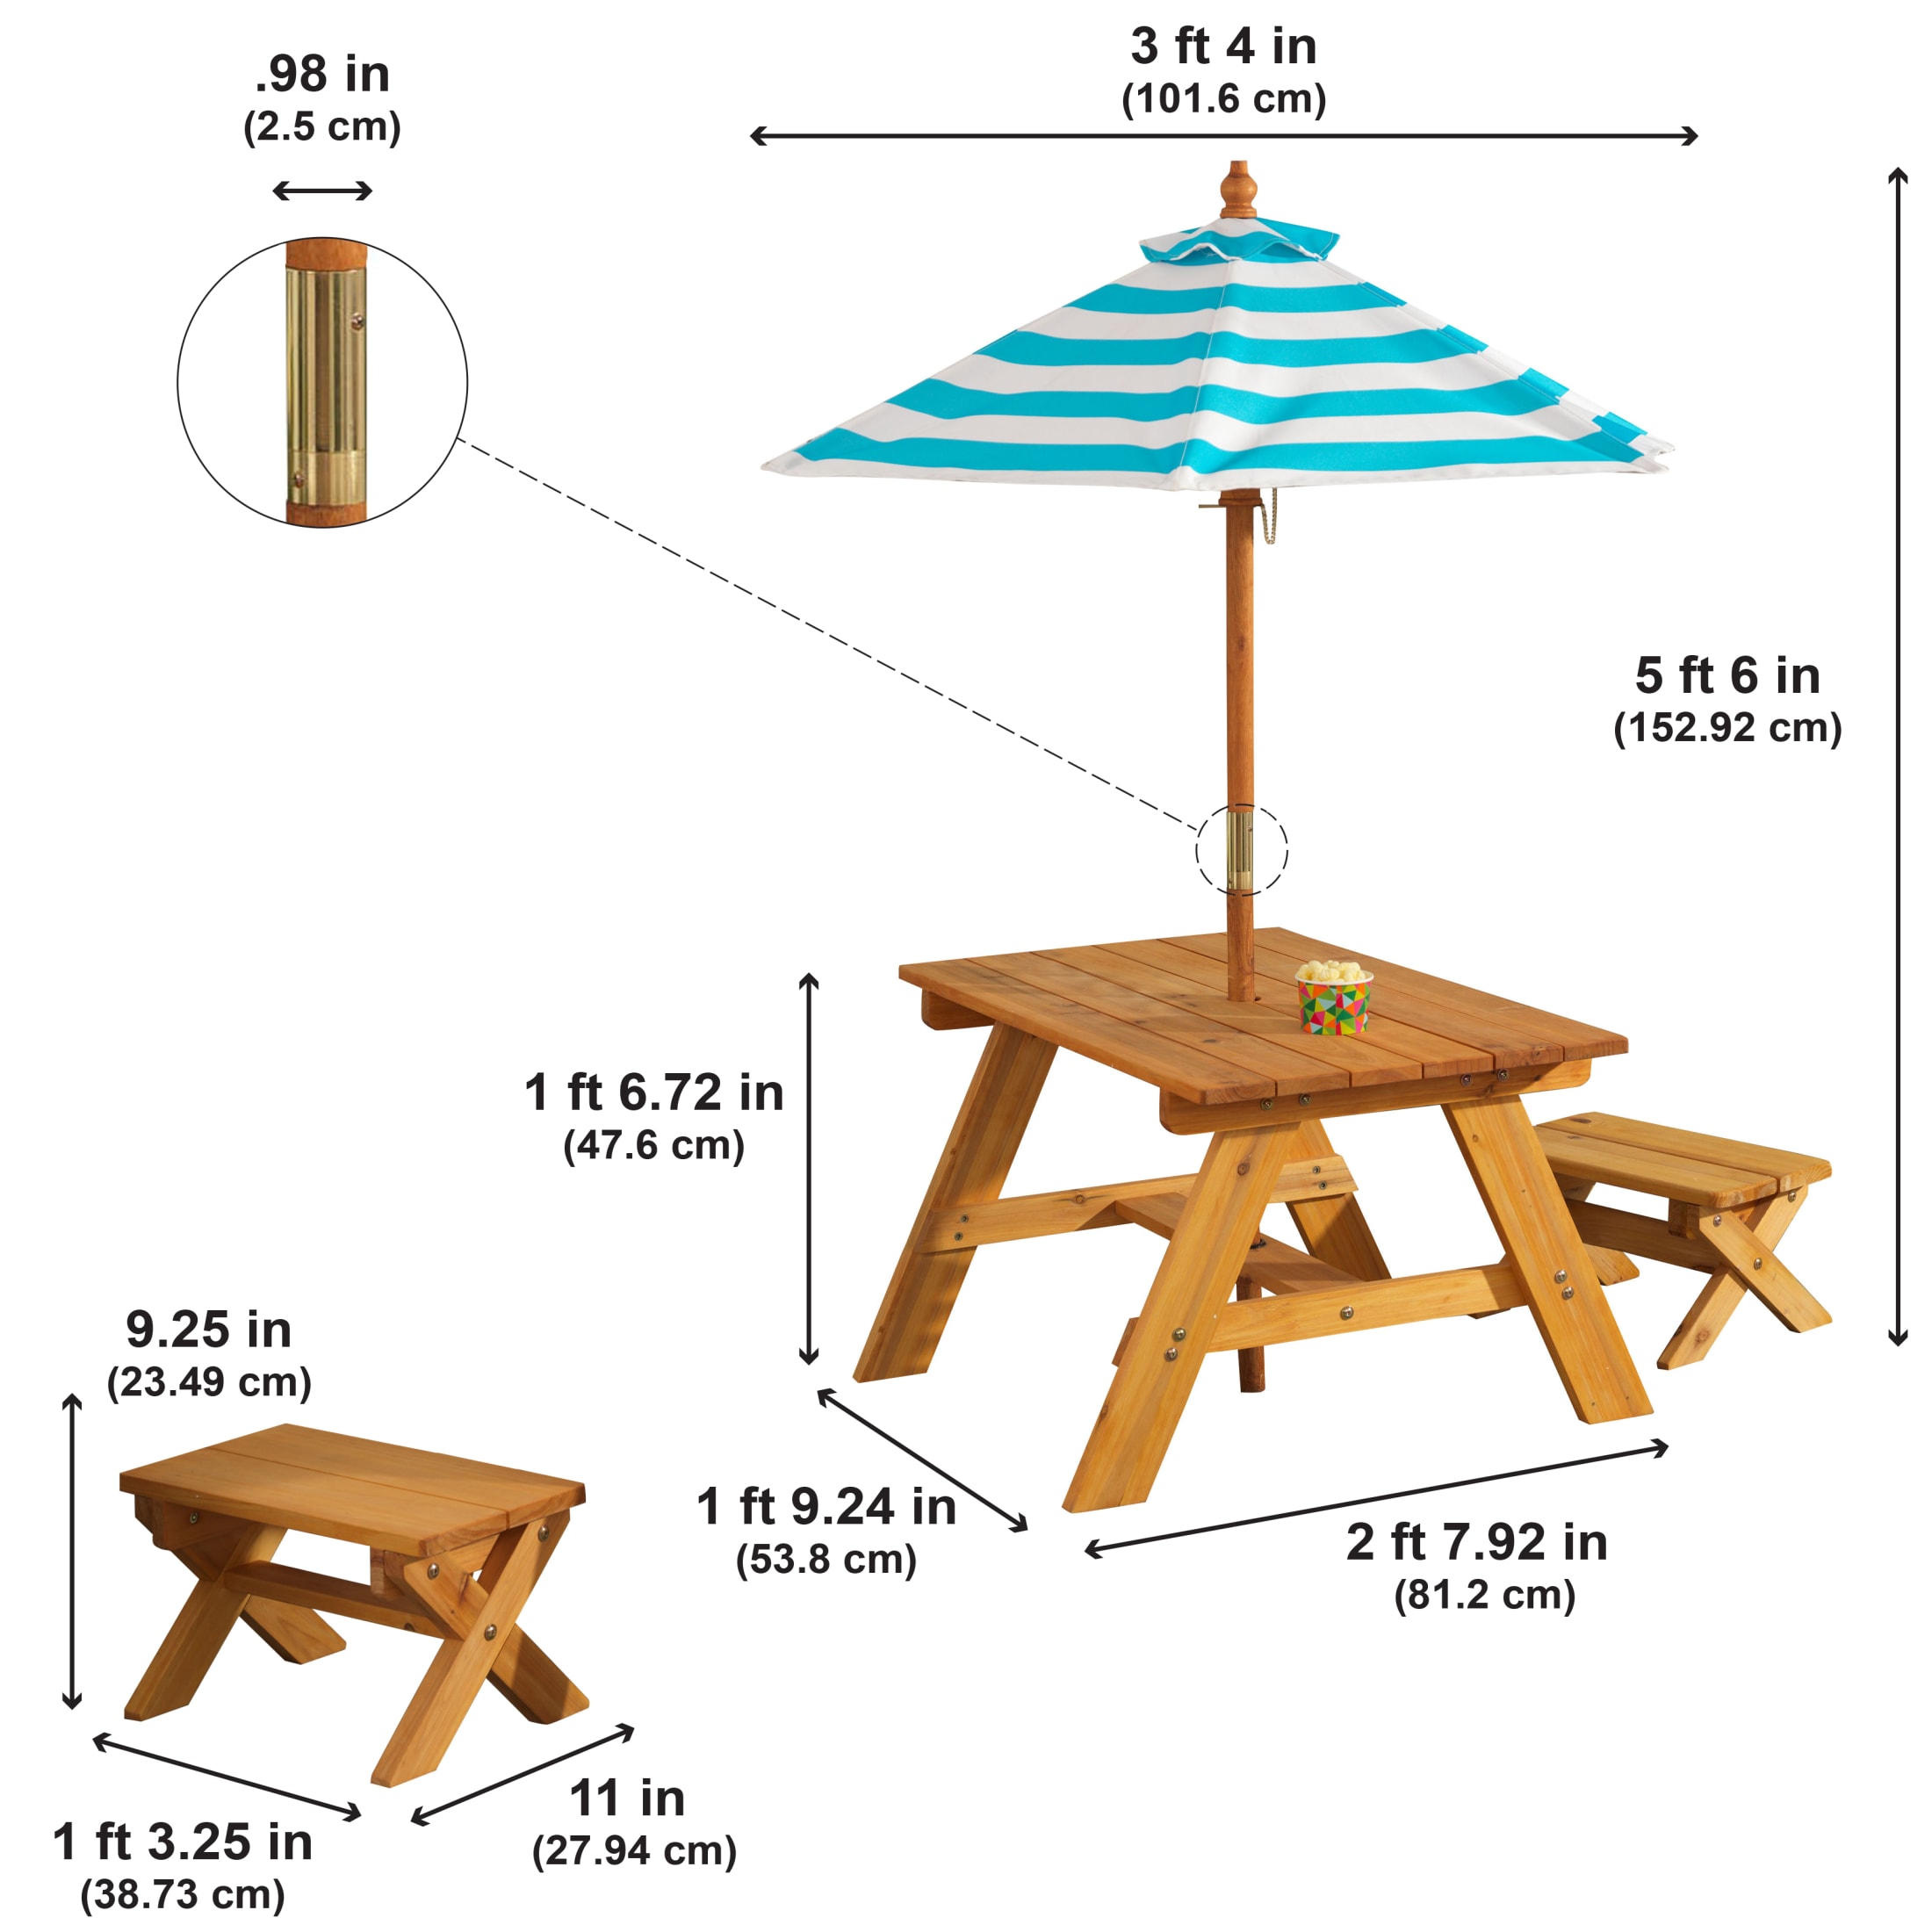 KidKraft Outdoor Wooden Table & Bench Set, Striped Umbrella, Turquoise and White - image 3 of 3